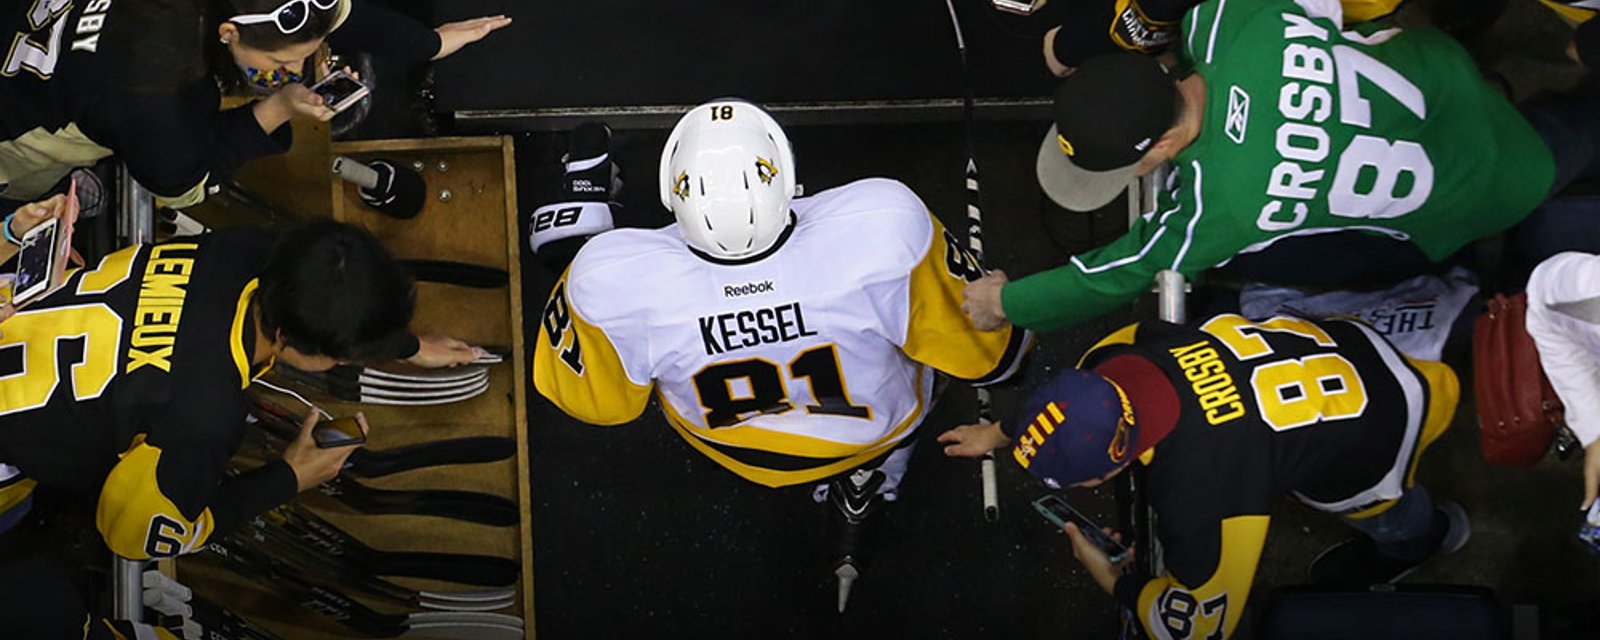 Report: Sullivan had a deal with Tocchet to manage Kessel